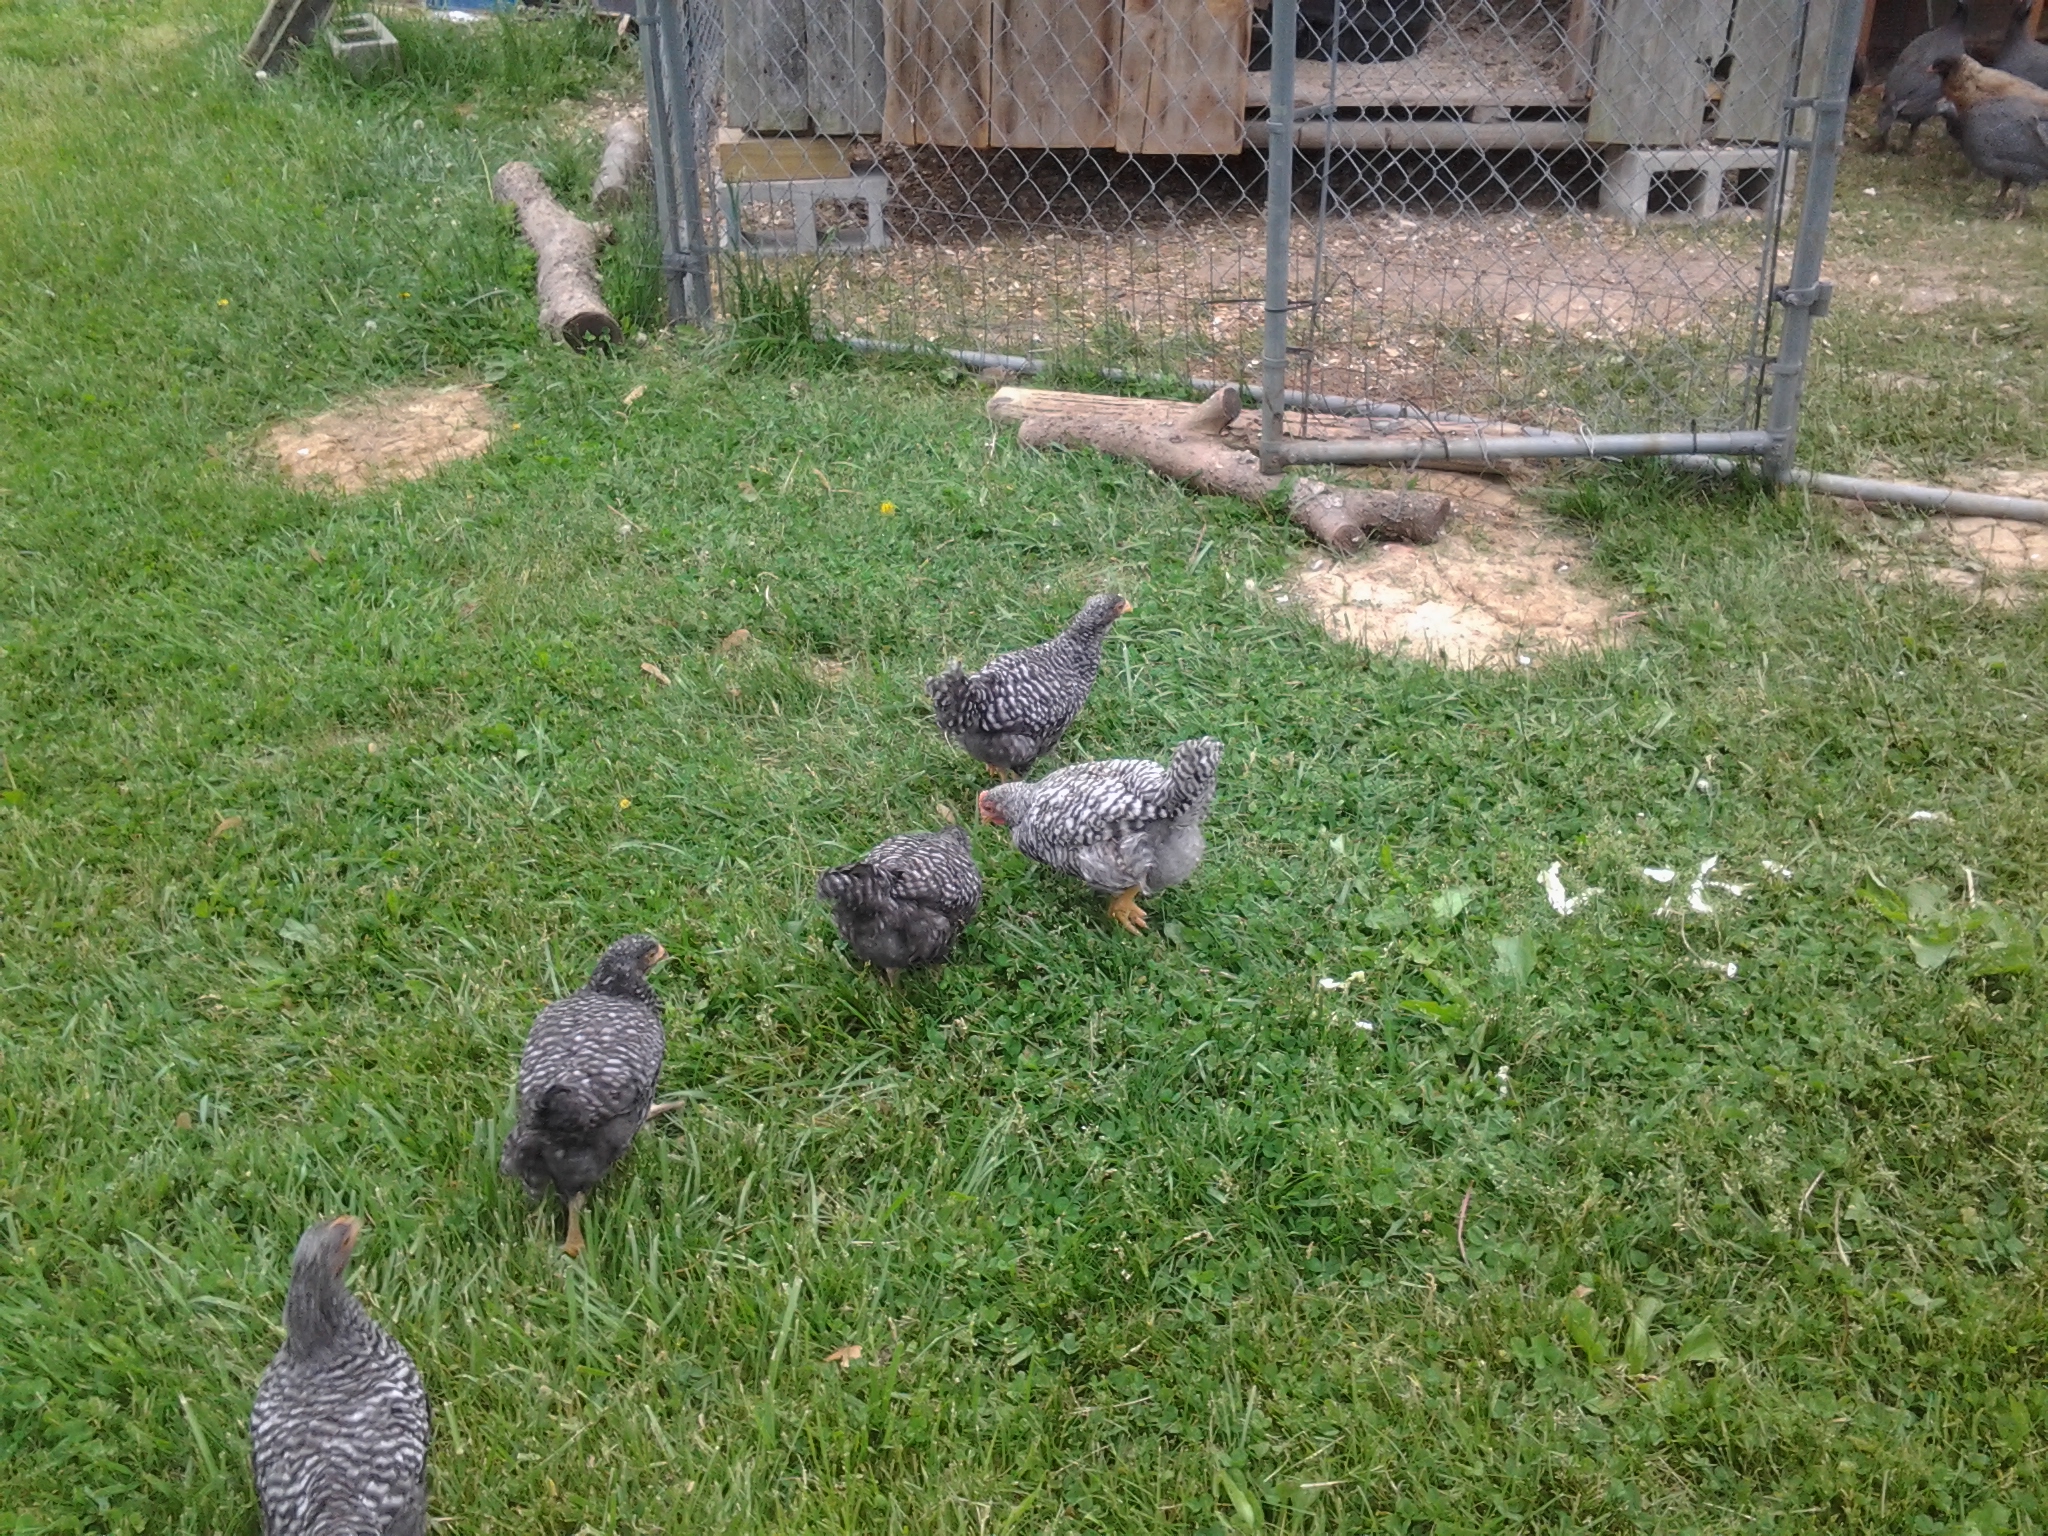 My younger barred rocks, including a pullet who turned out to be a roo. He's the lighter colored chick.  Named him Reggie